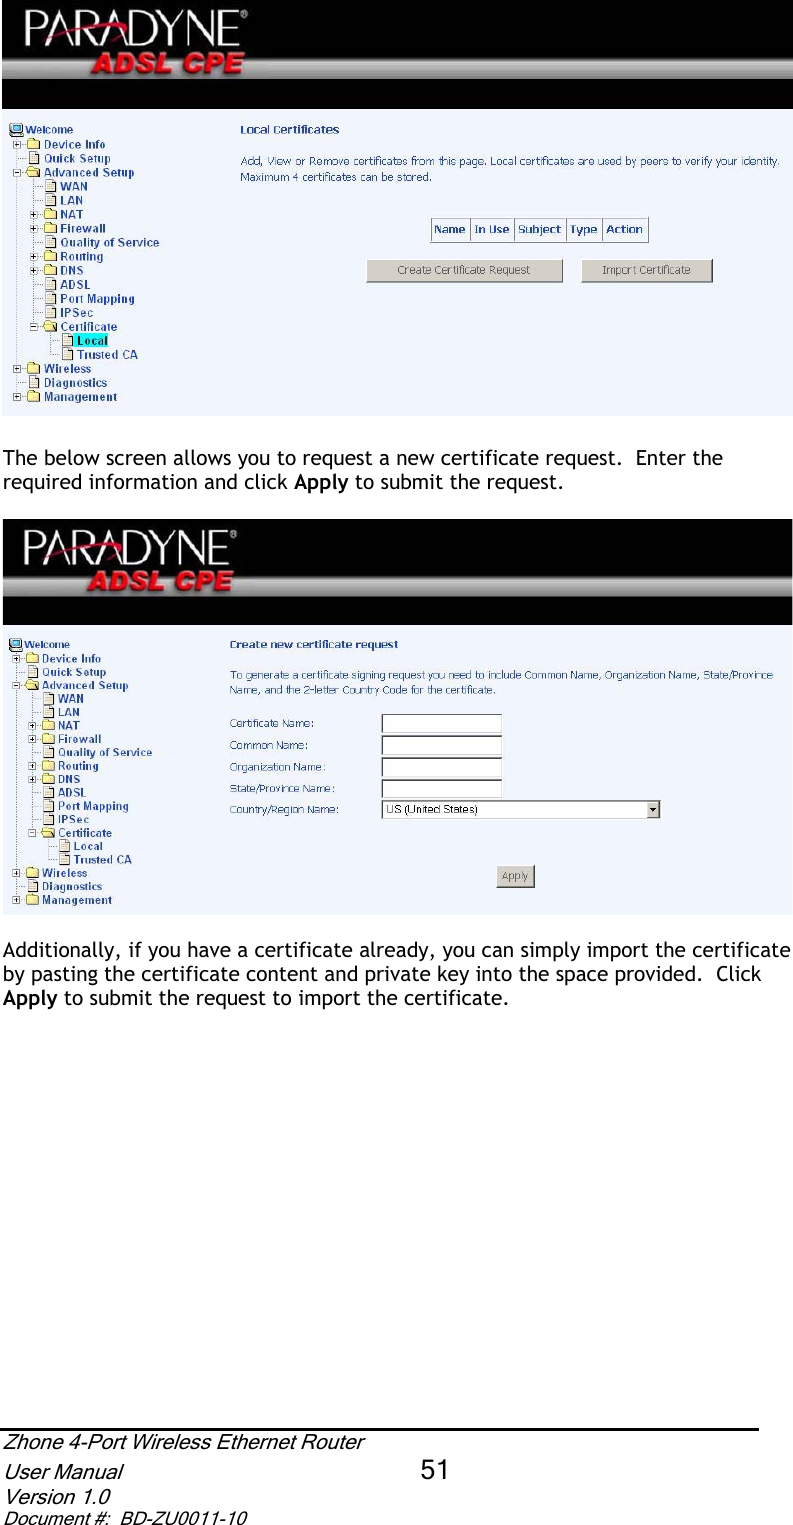 The below screen allows you to request a new certificate request.  Enter the required information and click Apply to submit the request.  Additionally, if you have a certificate already, you can simply import the certificate by pasting the certificate content and private key into the space provided.  Click Apply to submit the request to import the certificate. Zhone 4-Port Wireless Ethernet Router User Manual 51Version 1.0 Document #:  BD-ZU0011-10